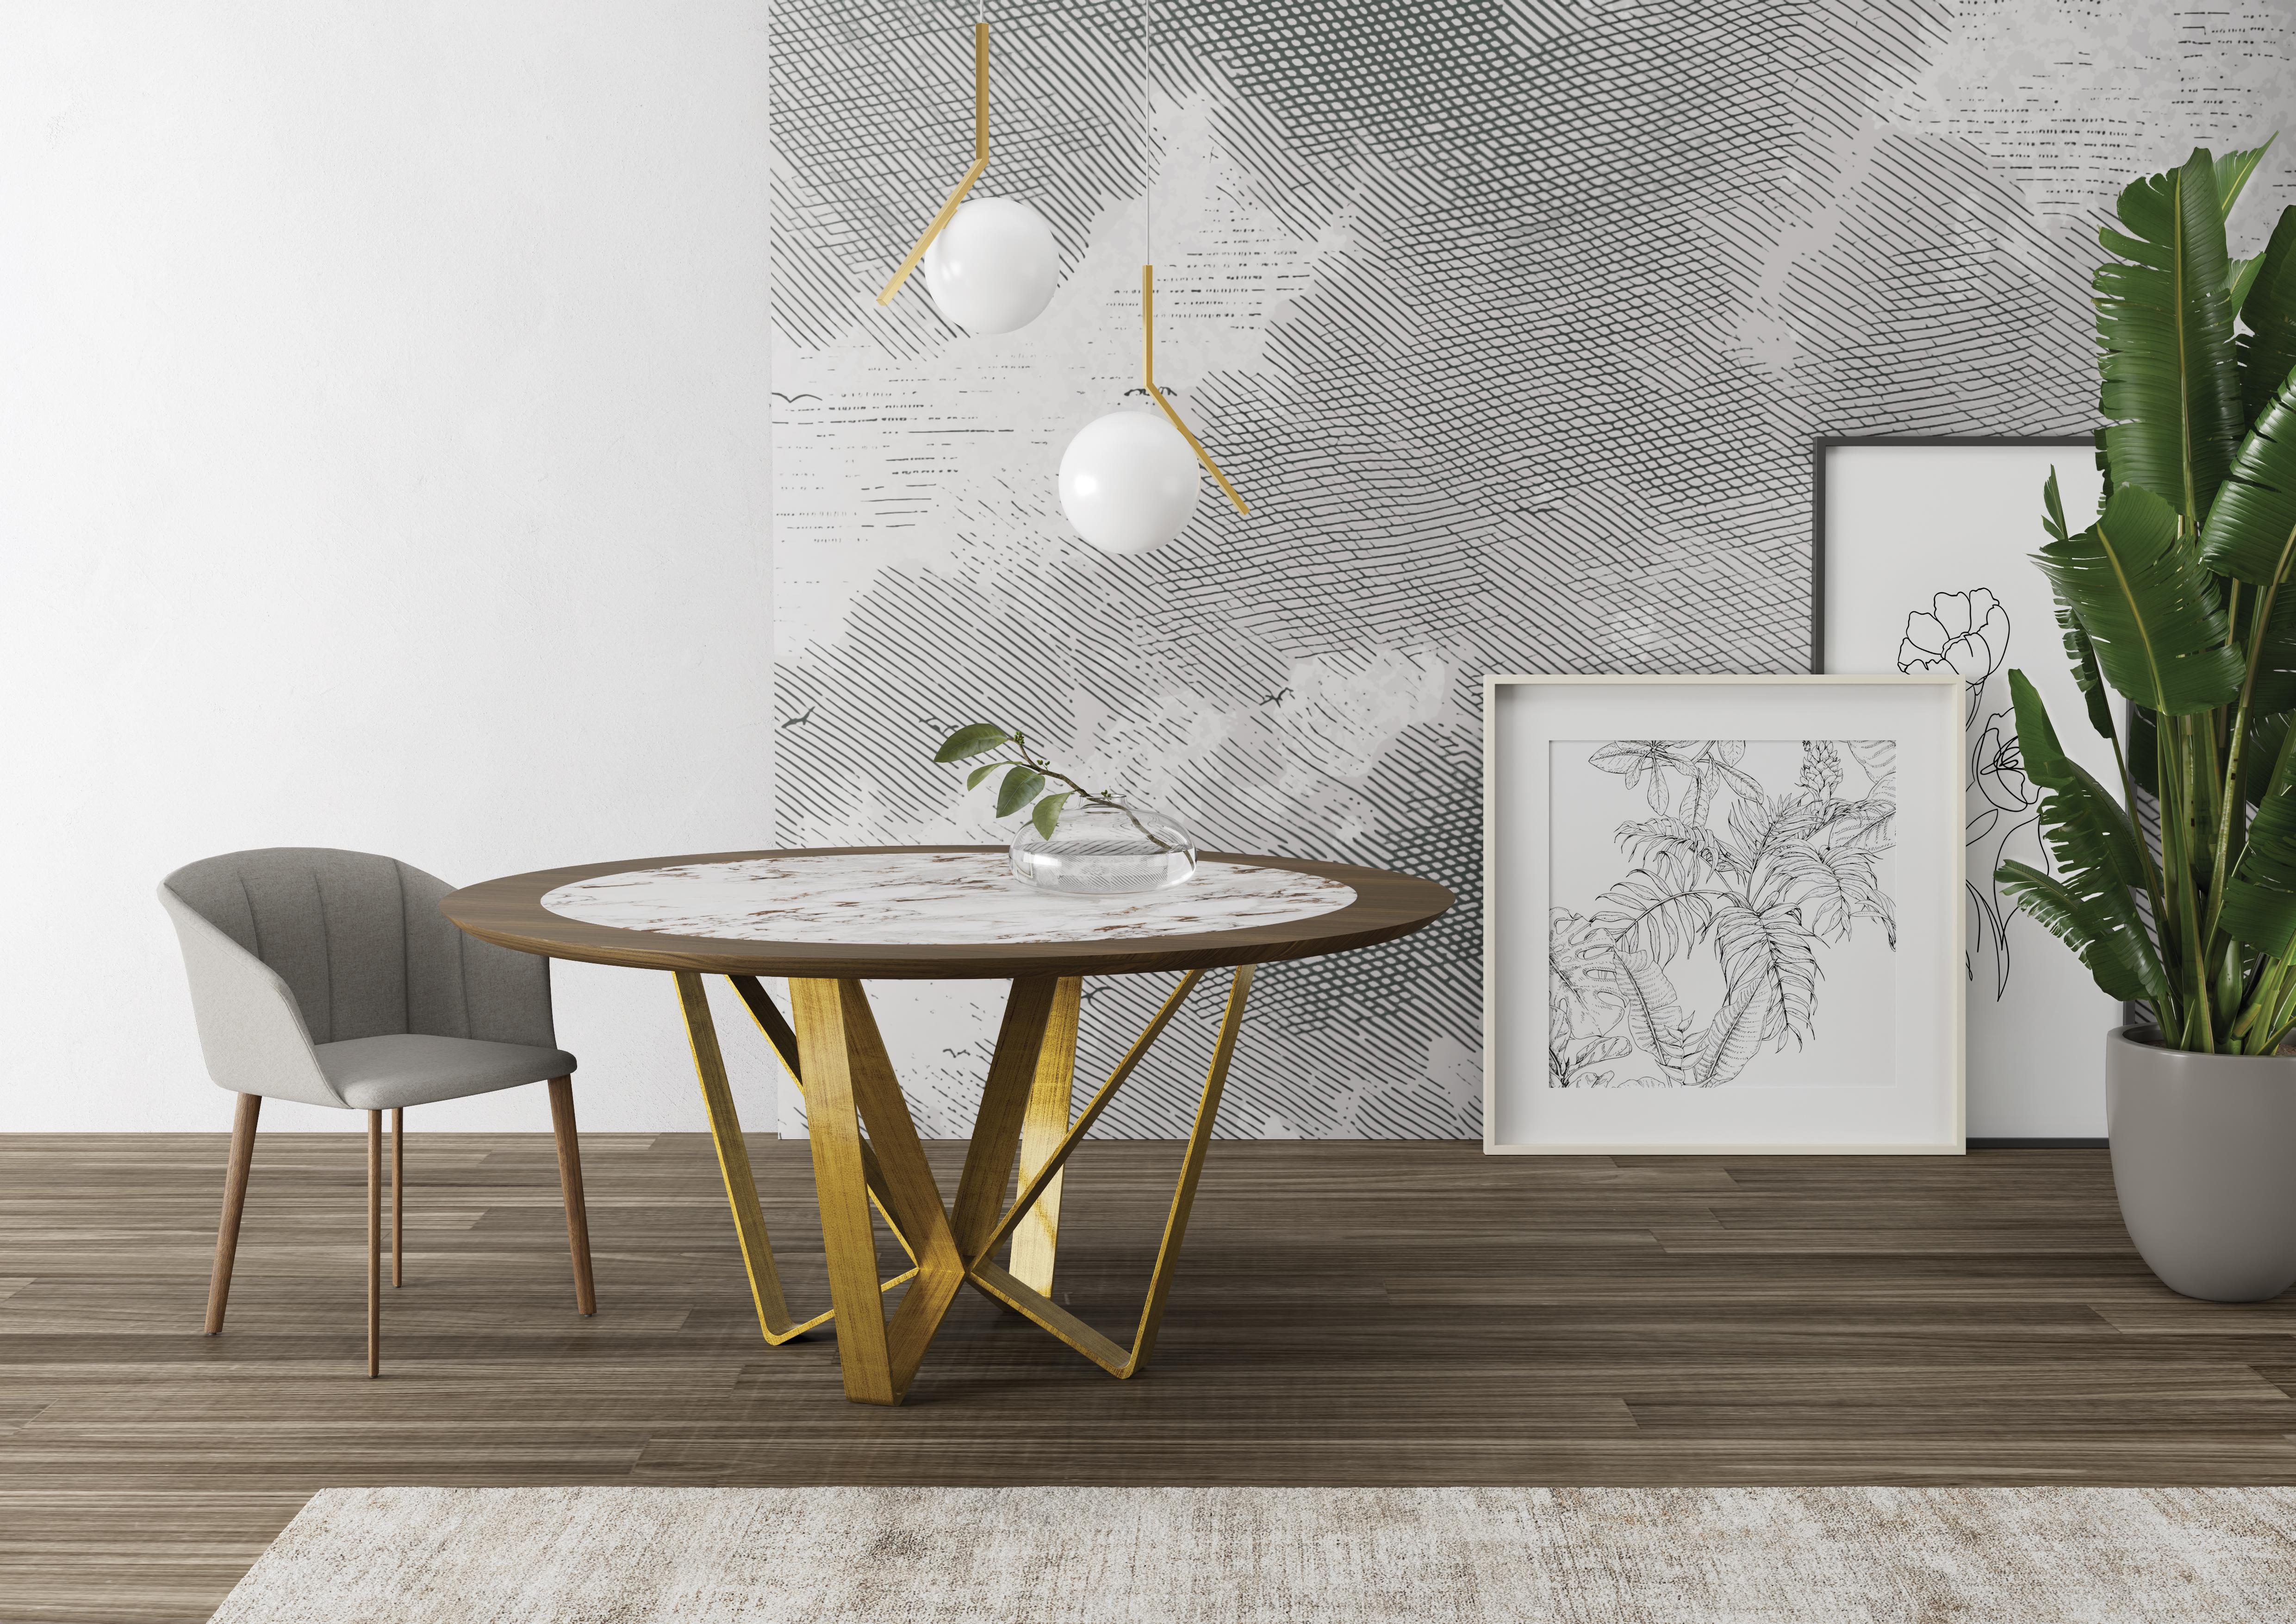 Zefiro Dining Table by Chinellato Design
Dimensions: D 160 x H 73 cm
Materials:
Top: Canaletto walnut top with glossy Capraia ceramic.
Base: Patinated gold leaf-finished walnut.


Round dining table available in two sizes, offered with three